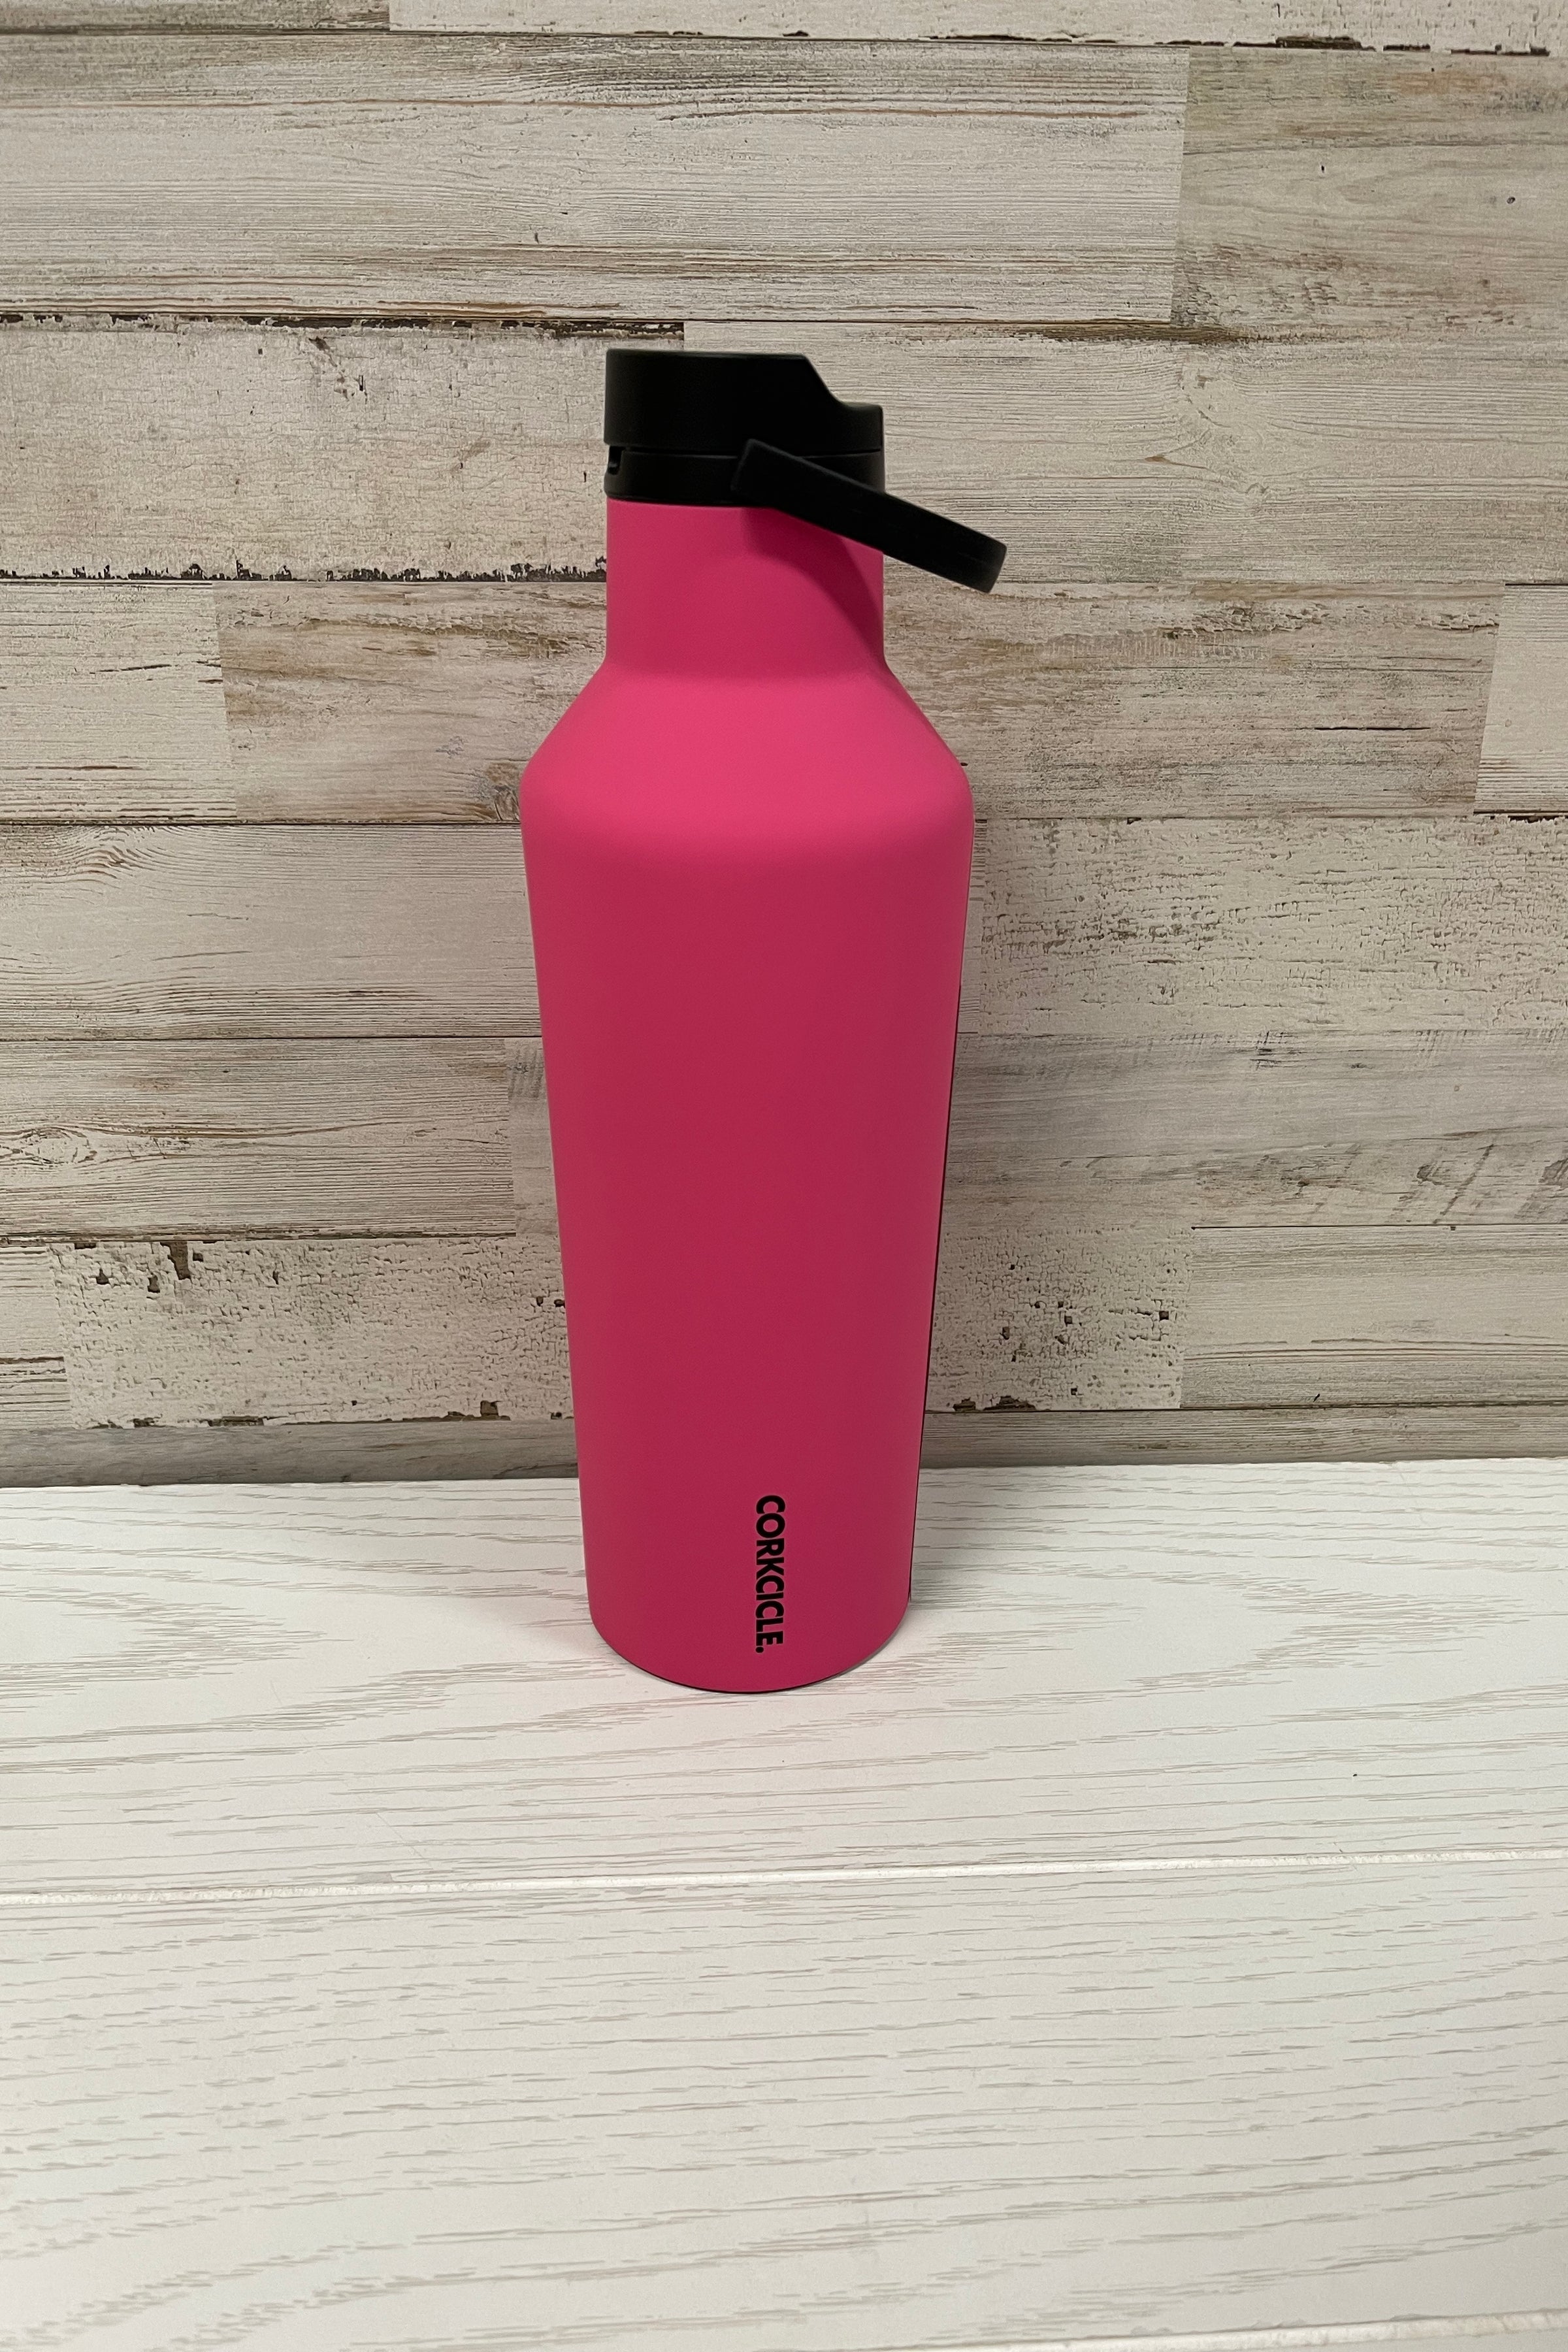 Corkcicle Classic 20 Ounce Sport Canteen Triple Insulated